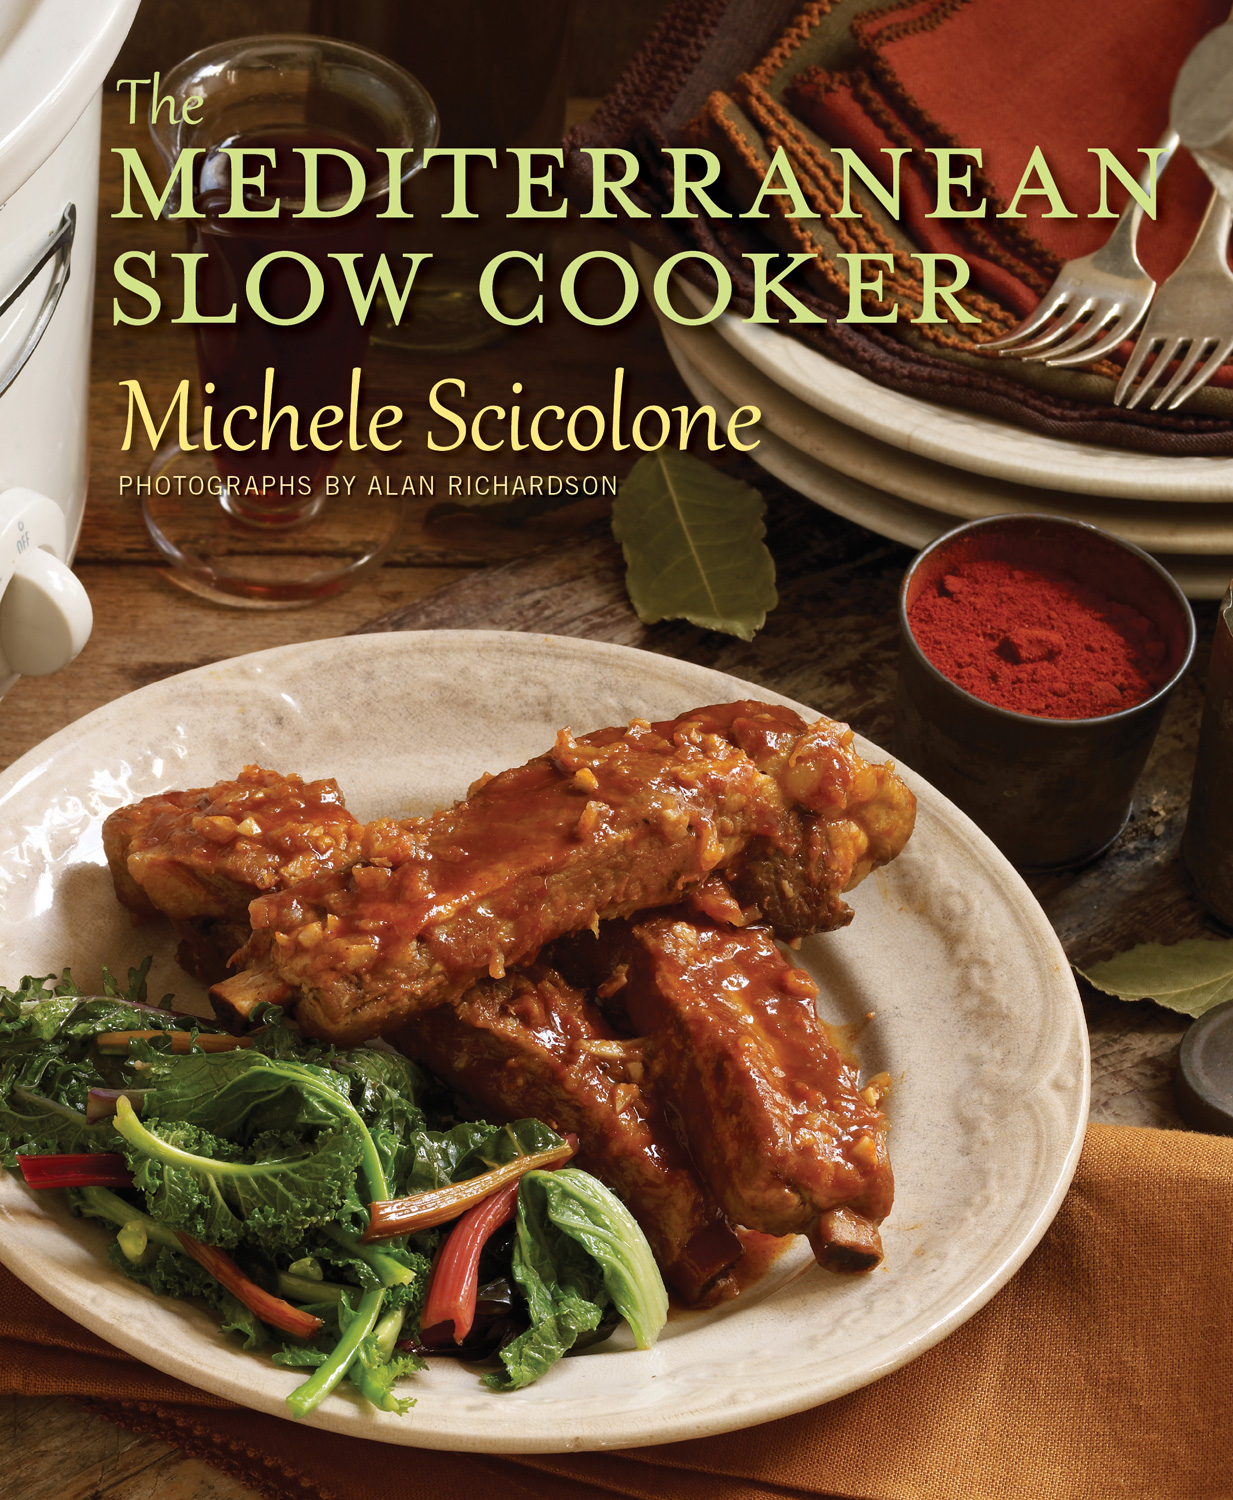 Book Cover for "The Mediterranean Slow Cooker"